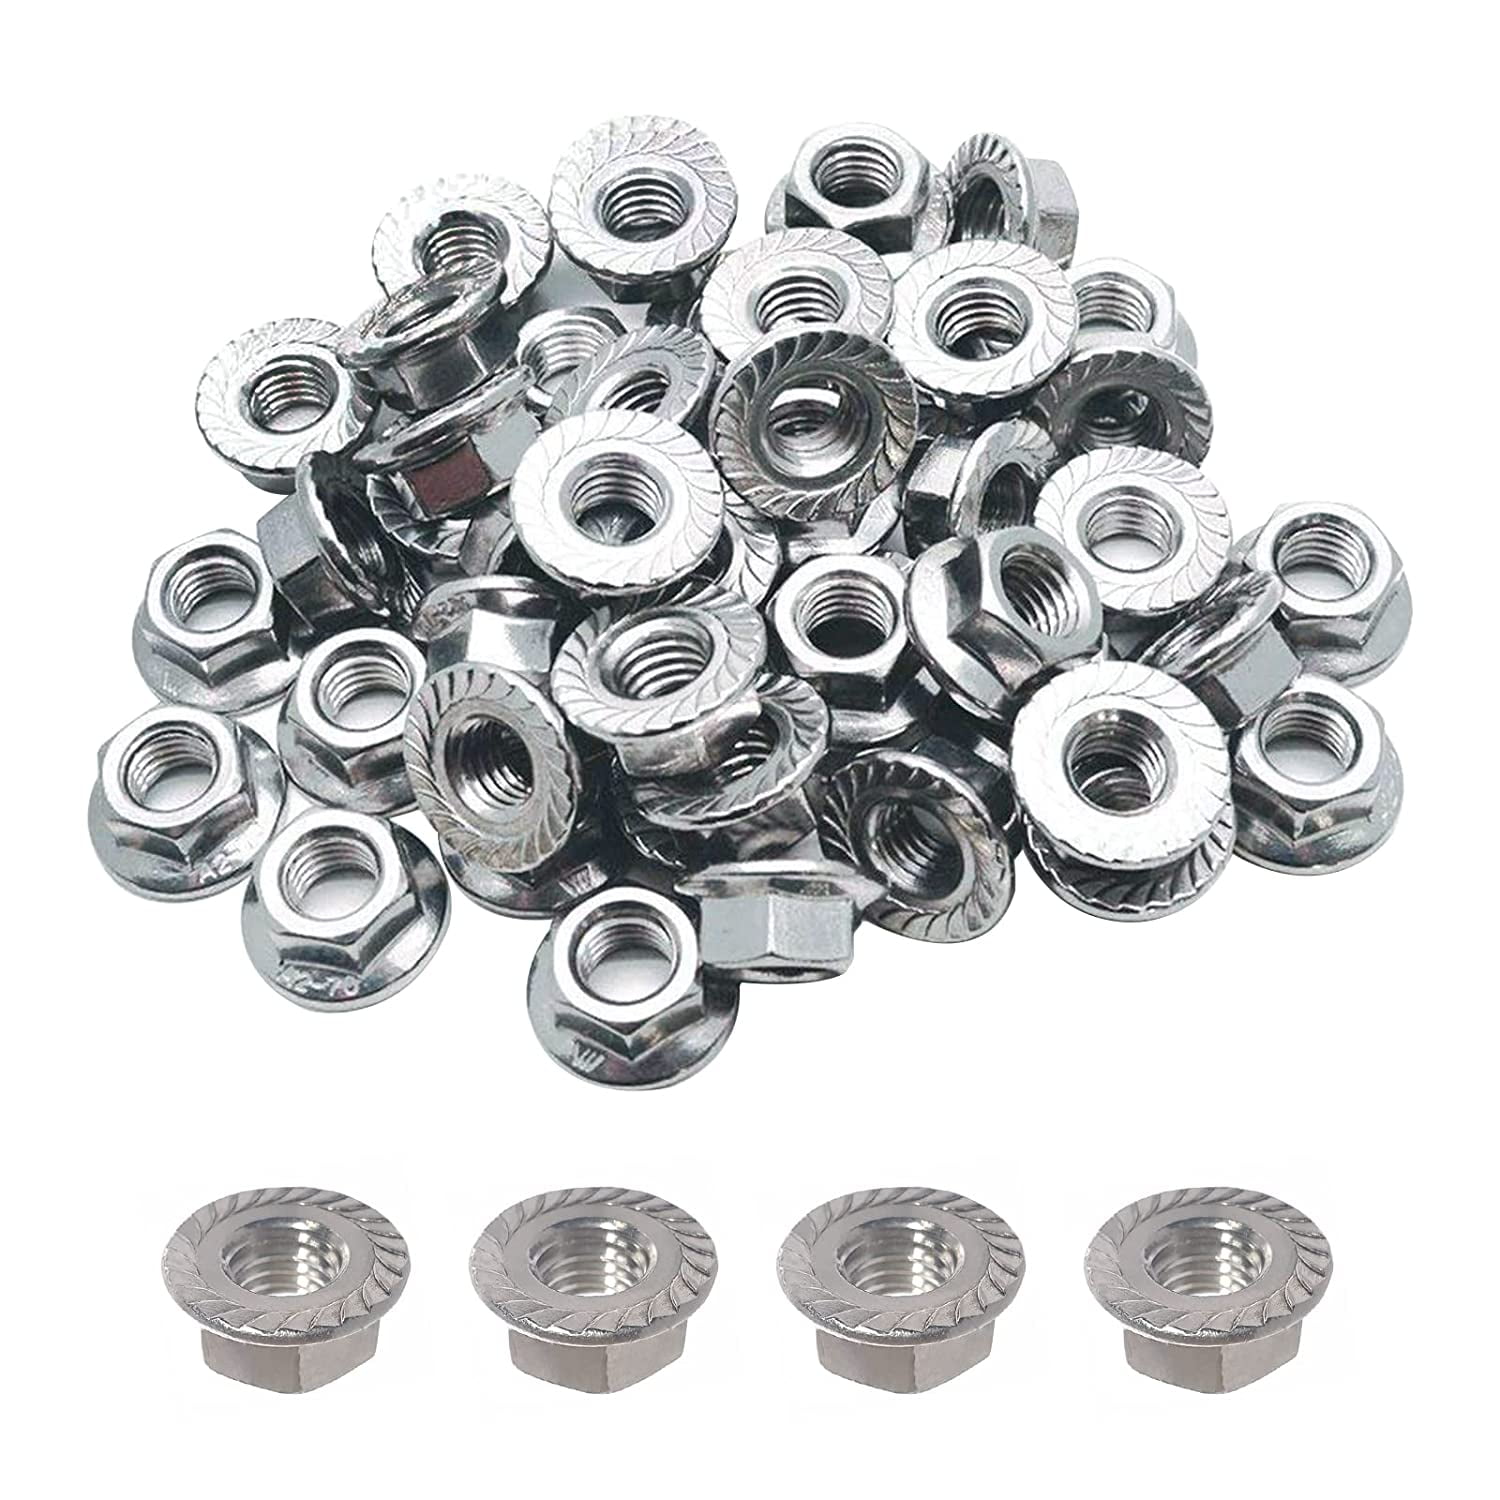 50Pcs M2 Dia 2mm Hex Screw Nuts 304 Stainless Steel Hexagon Nuts DIY Fasteners 